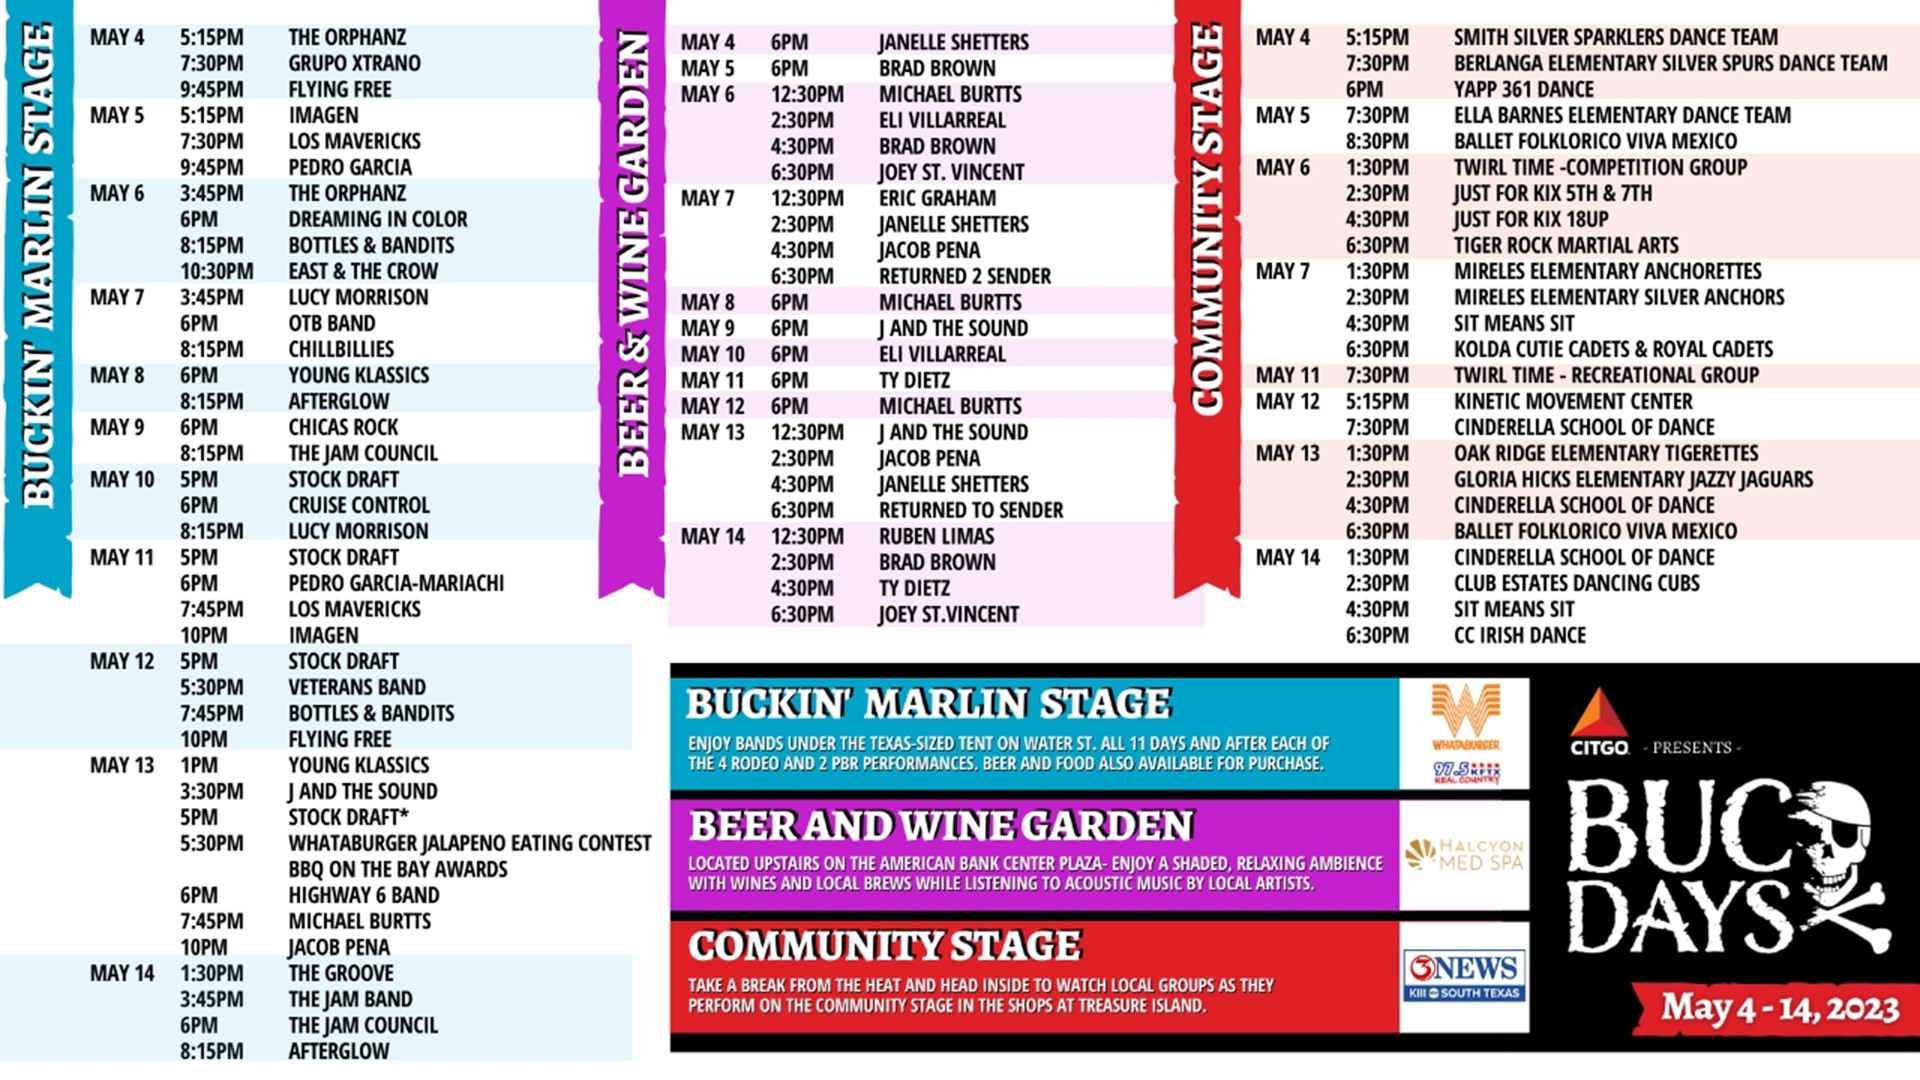 Buc Days 2023 events, ticket info and schedule